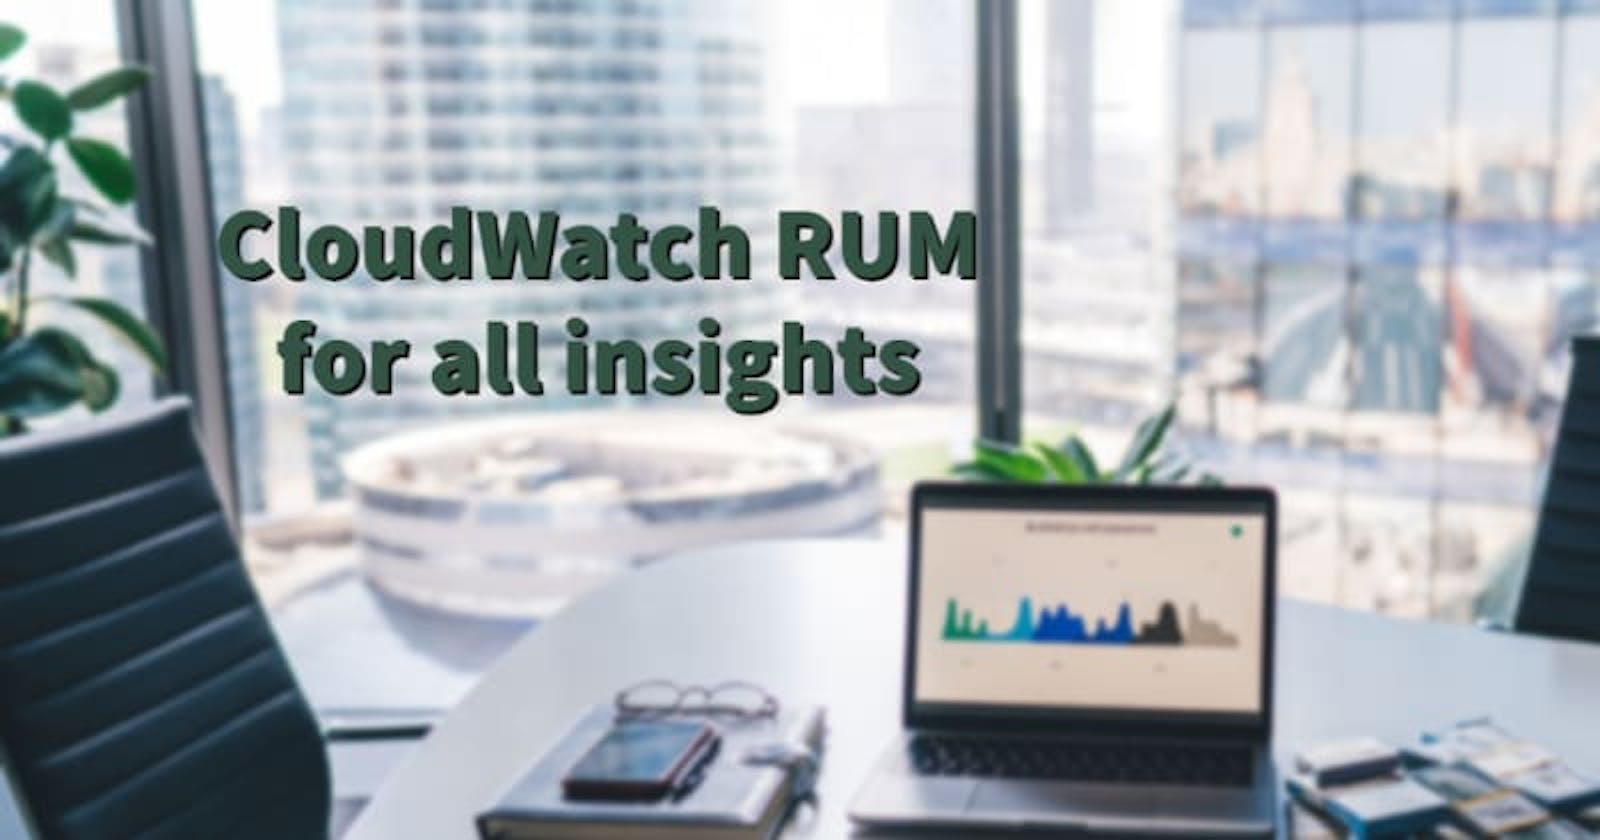 CloudWatch RUM for all insights